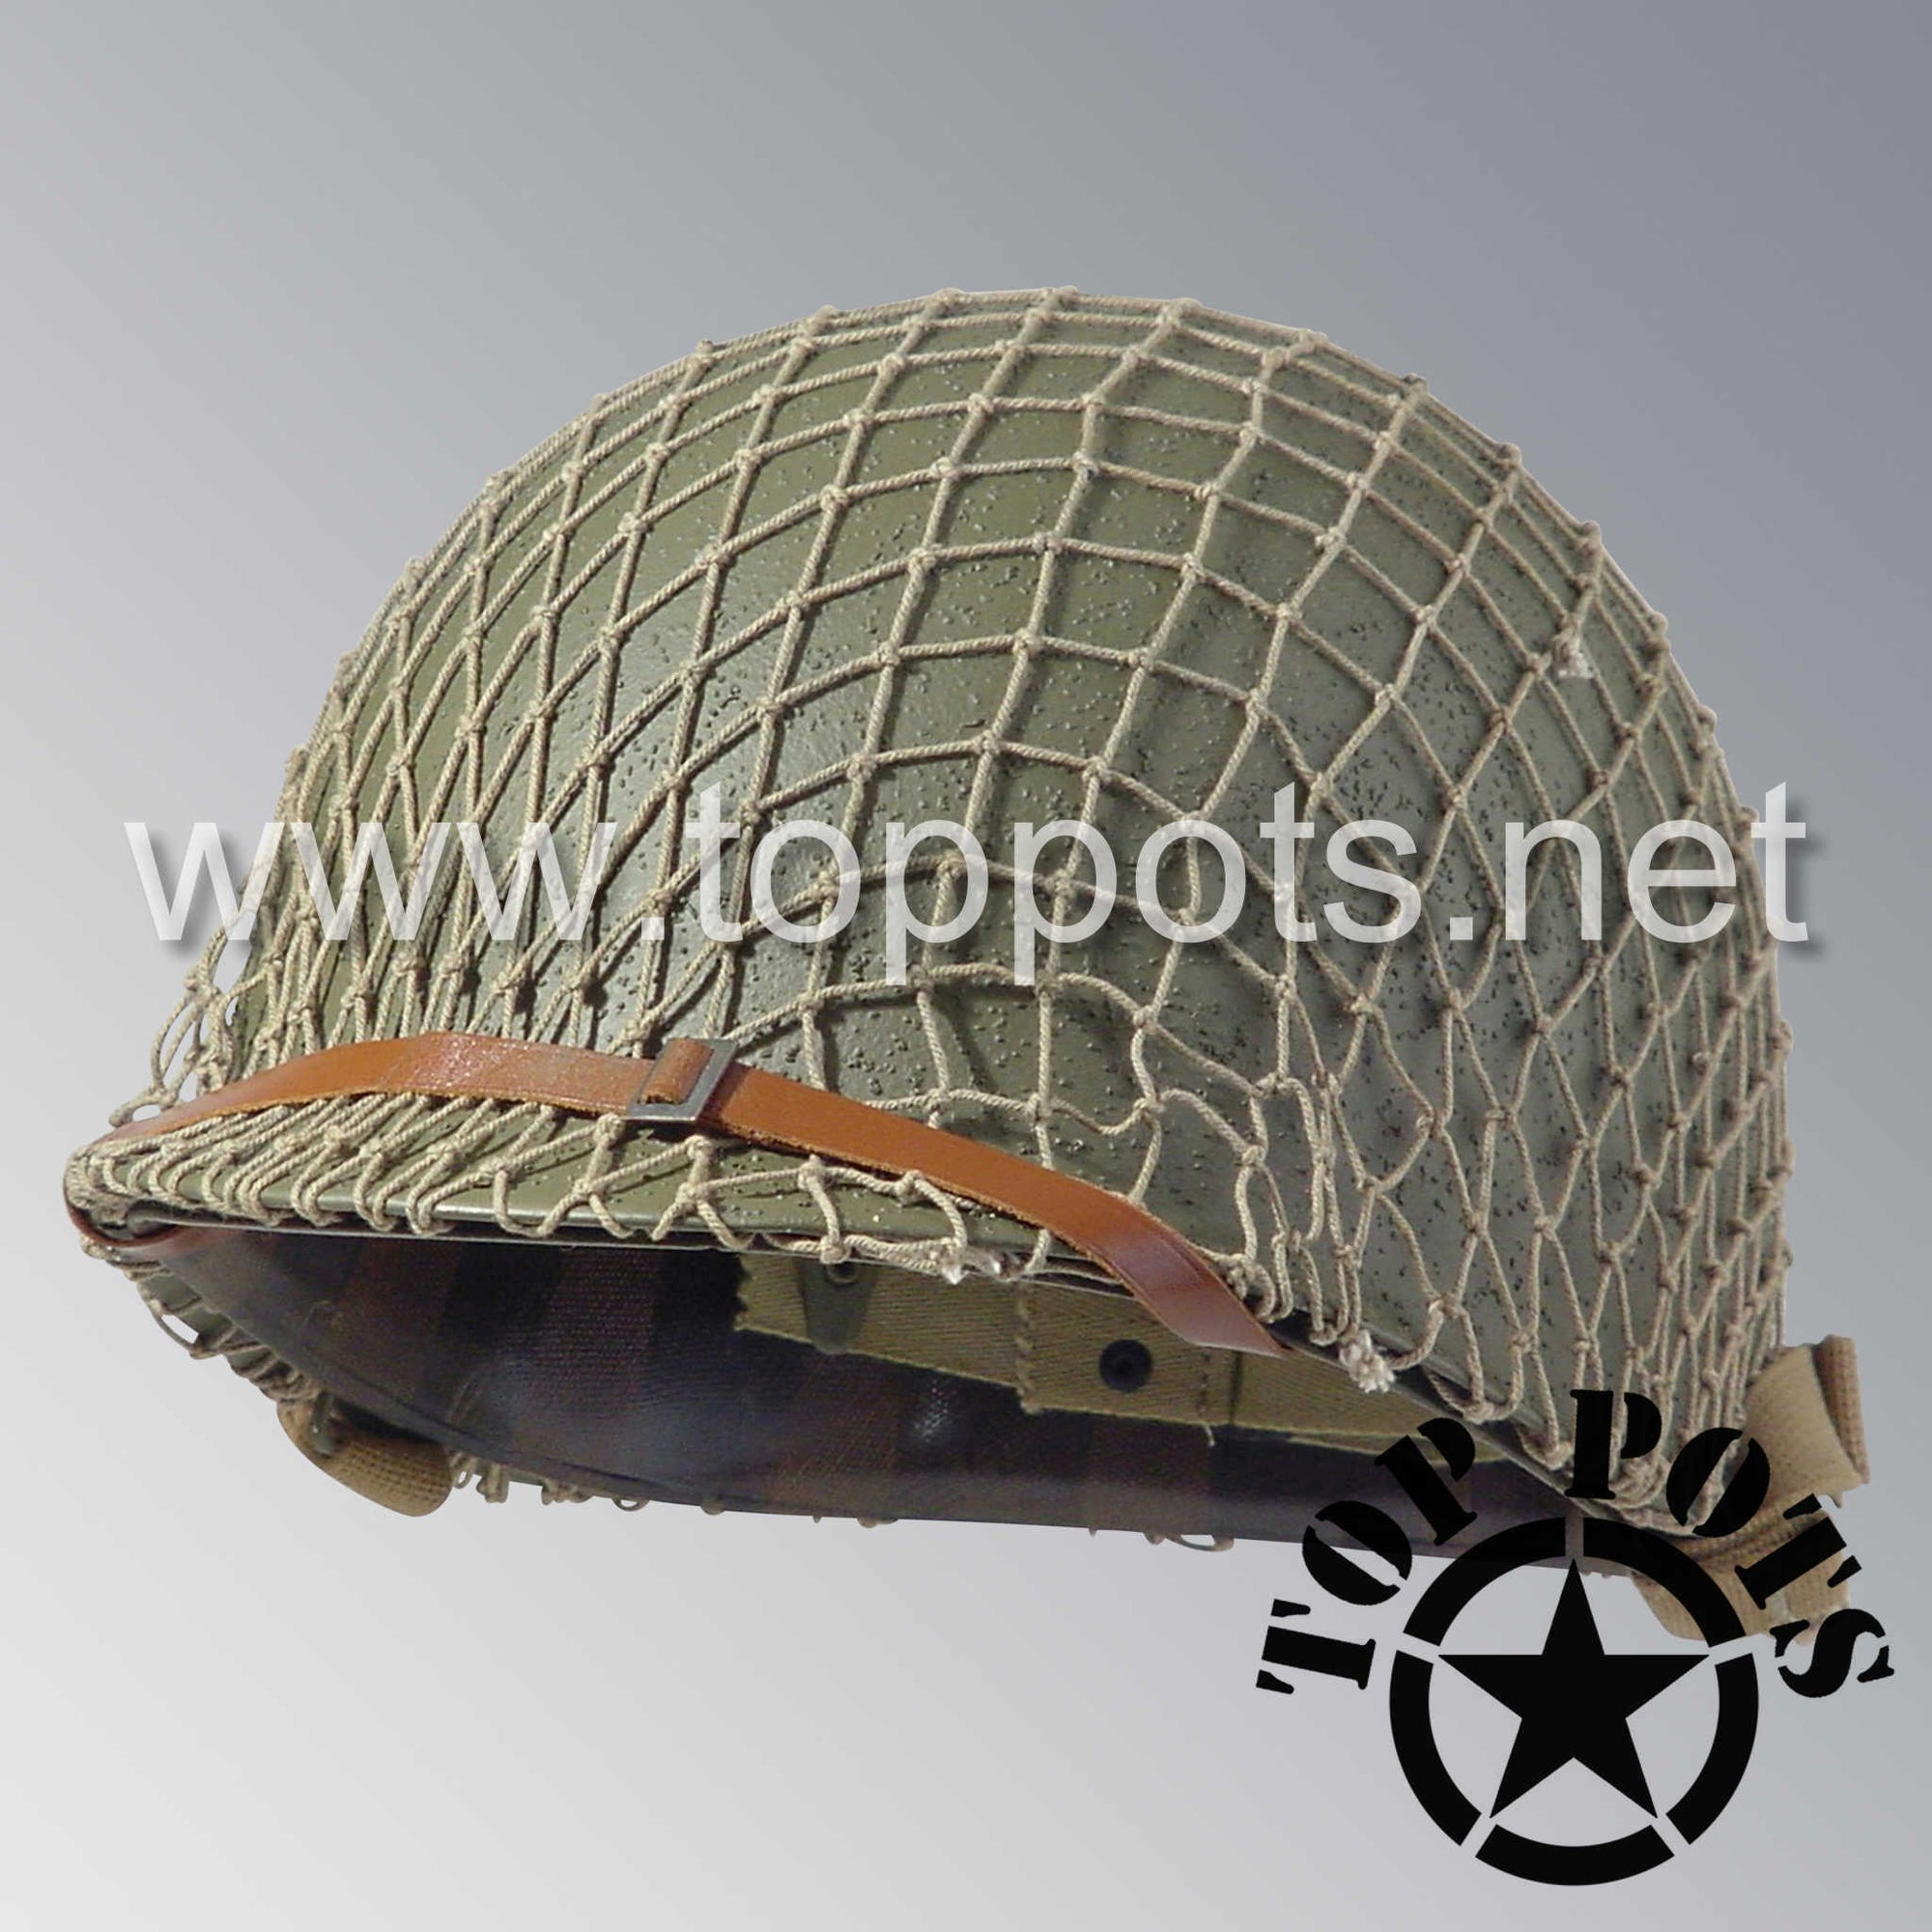 WWII US Army Restored Original M1 Infantry Helmet Fix Bale Shell and Liner with Early War Leather Chinstrap and Khaki Net